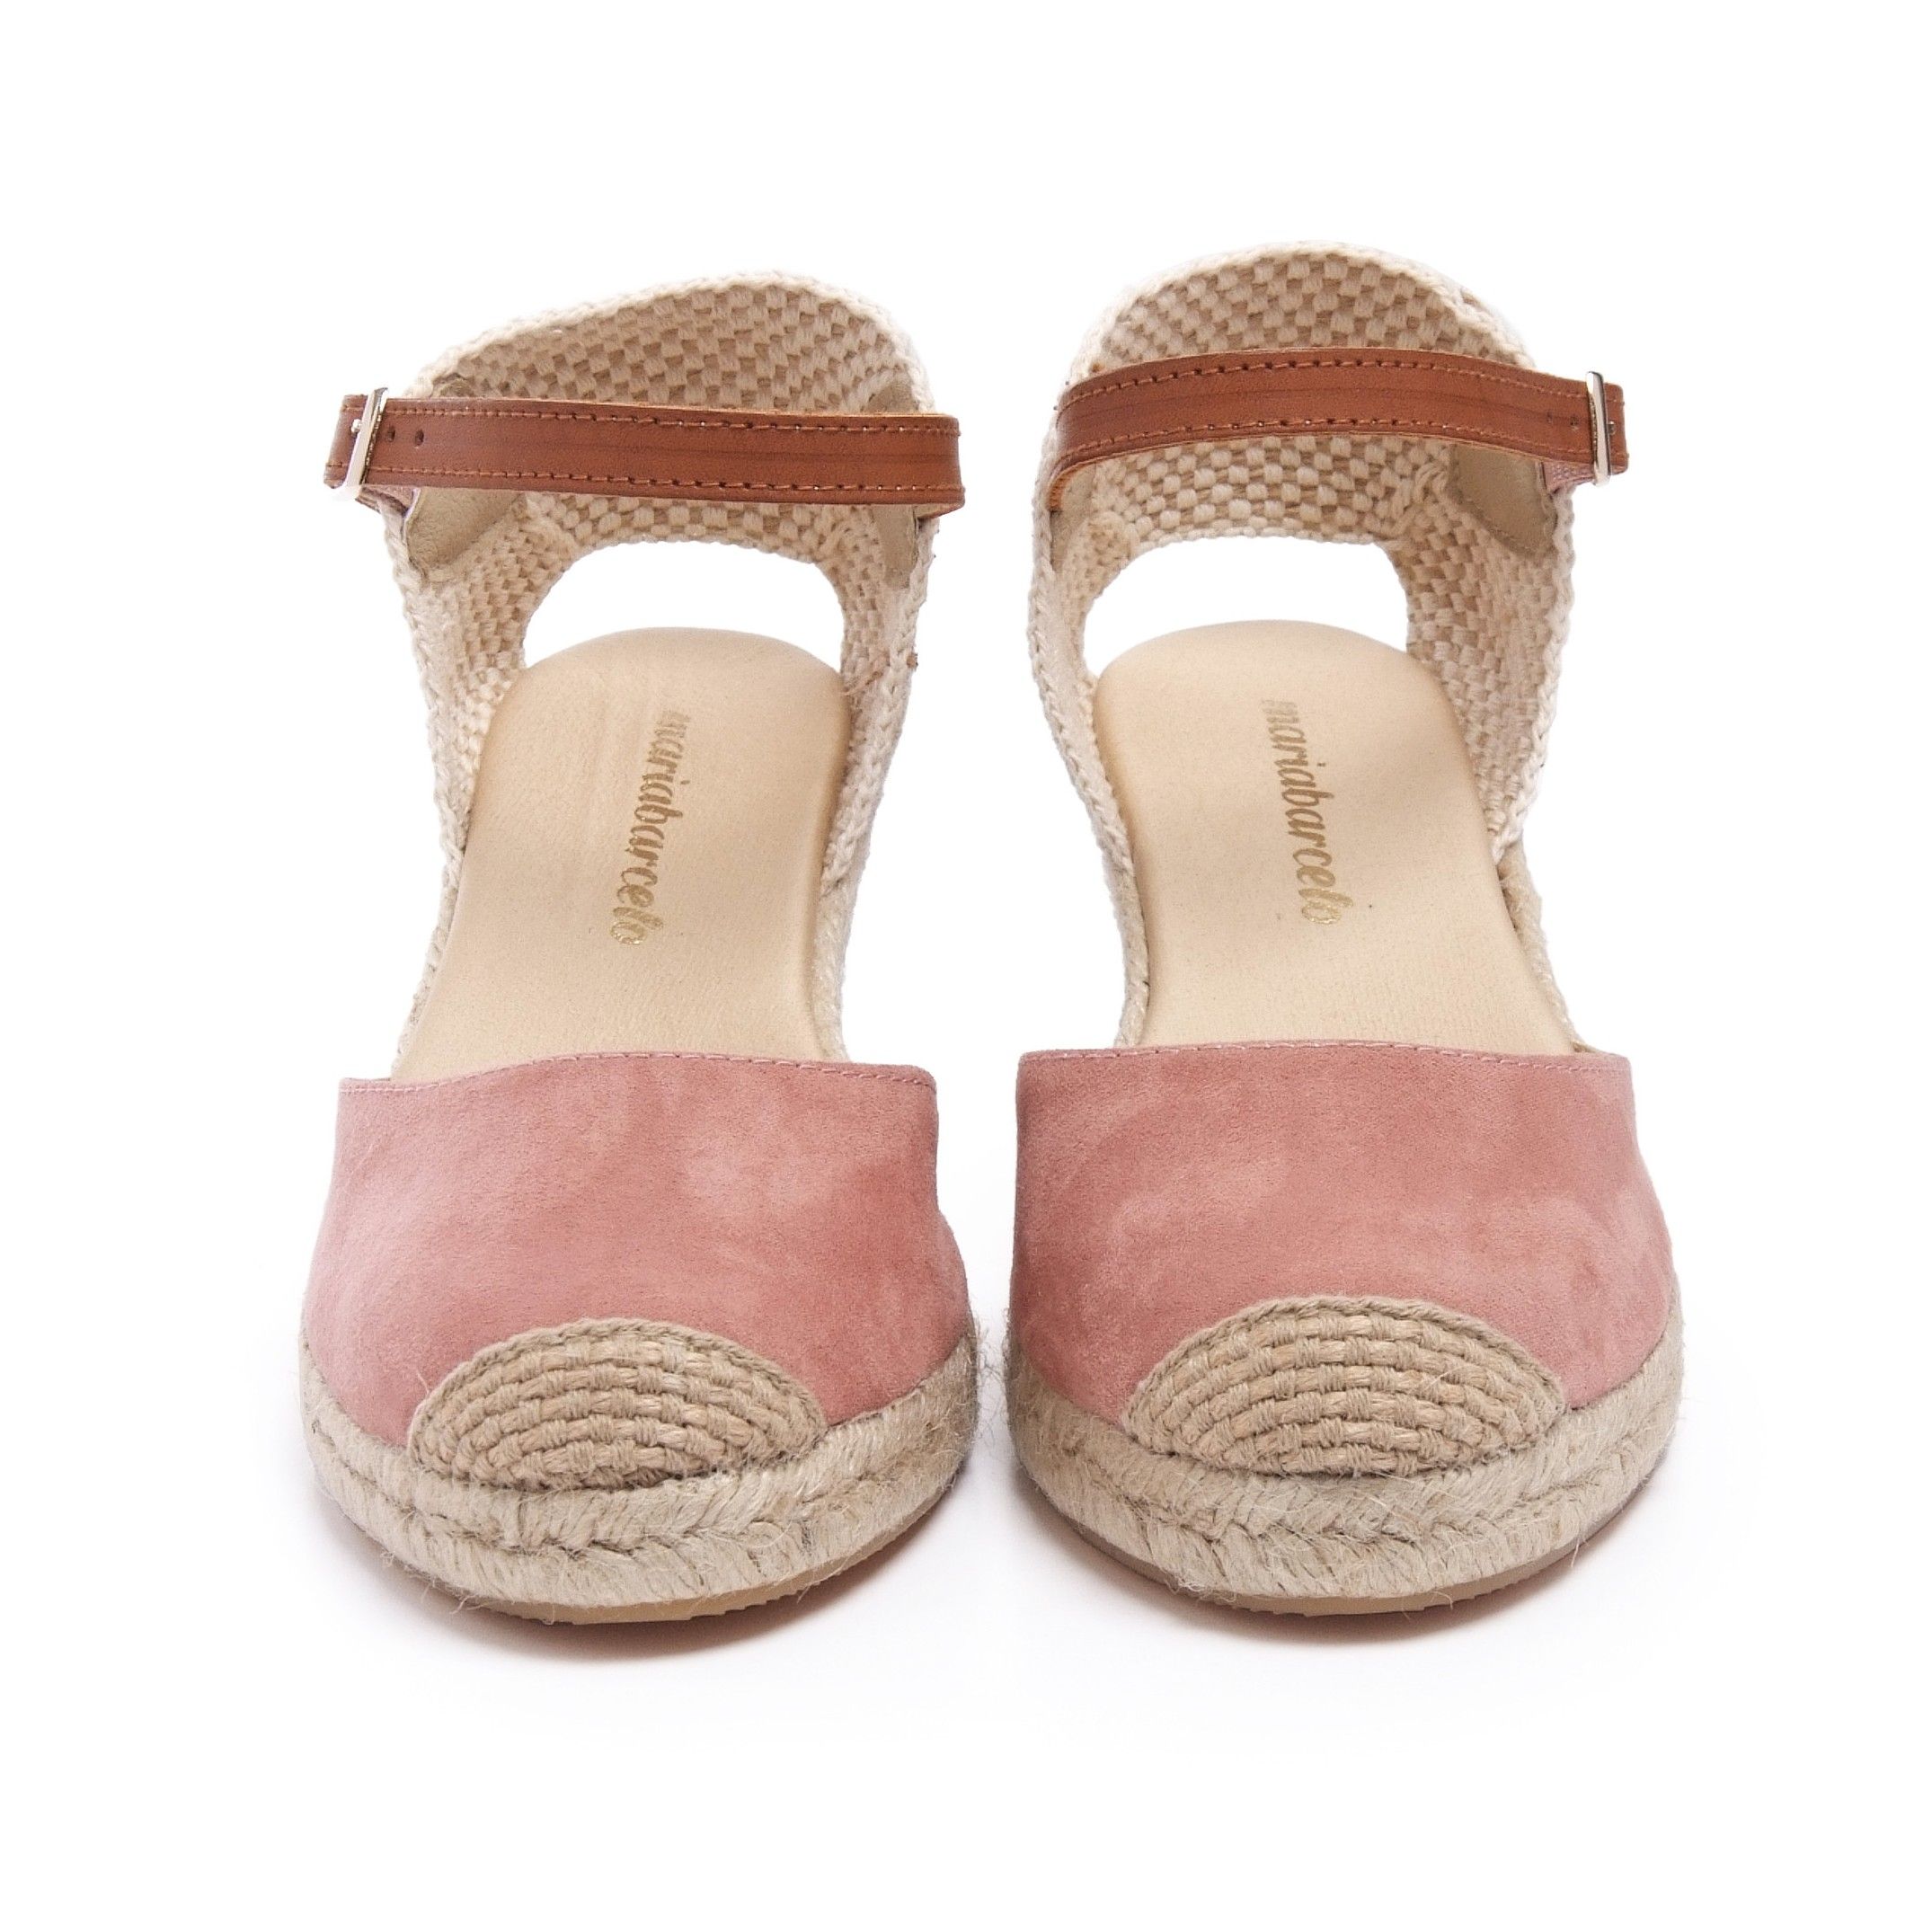 Jute and leather high wedge with classic toe. Closure: metallic buckle at ankle height. Upper: leather and tissue. Insole: gel lined in leather. Wedge: 7 cm of jute. Platform: 2 cm. Sole:Non-skid rubber. MADE IN SPAIN.